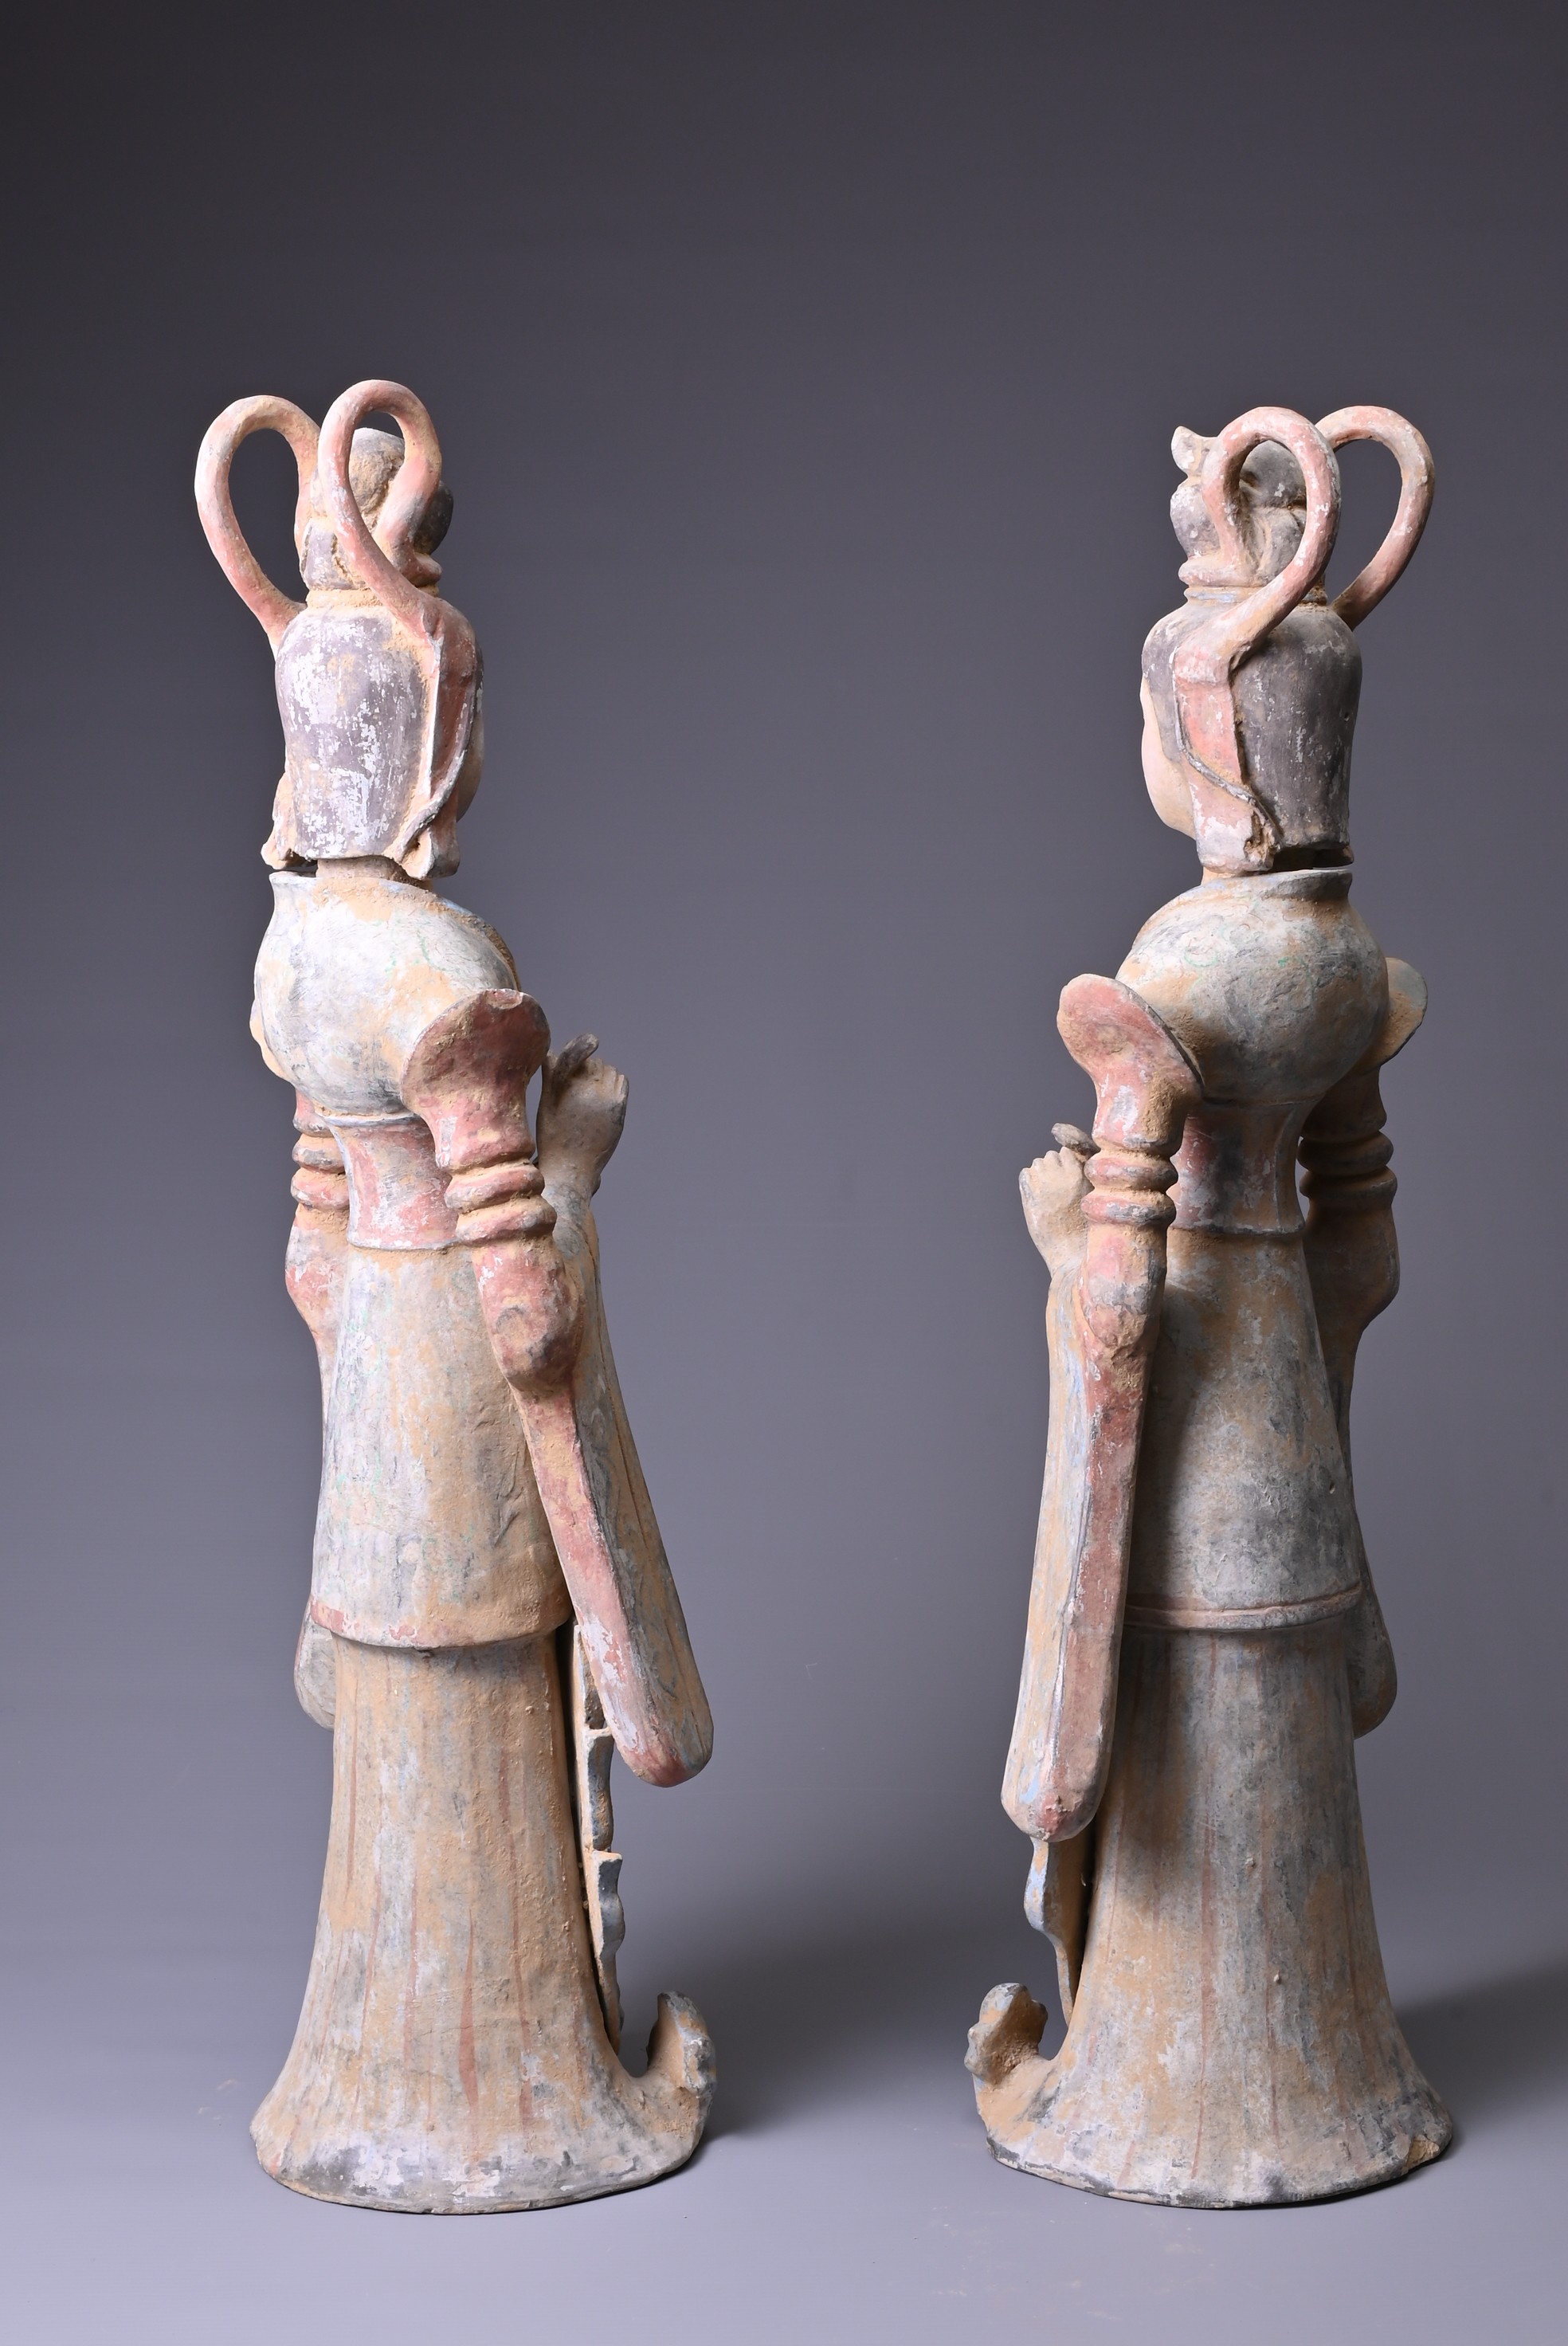 A LARGE PAIR OF CHINESE PAINTED POTTERY FIGURES OF DANCERS, TL TESTED AS TANG DYNASTY (AD 618-907) - Image 6 of 7